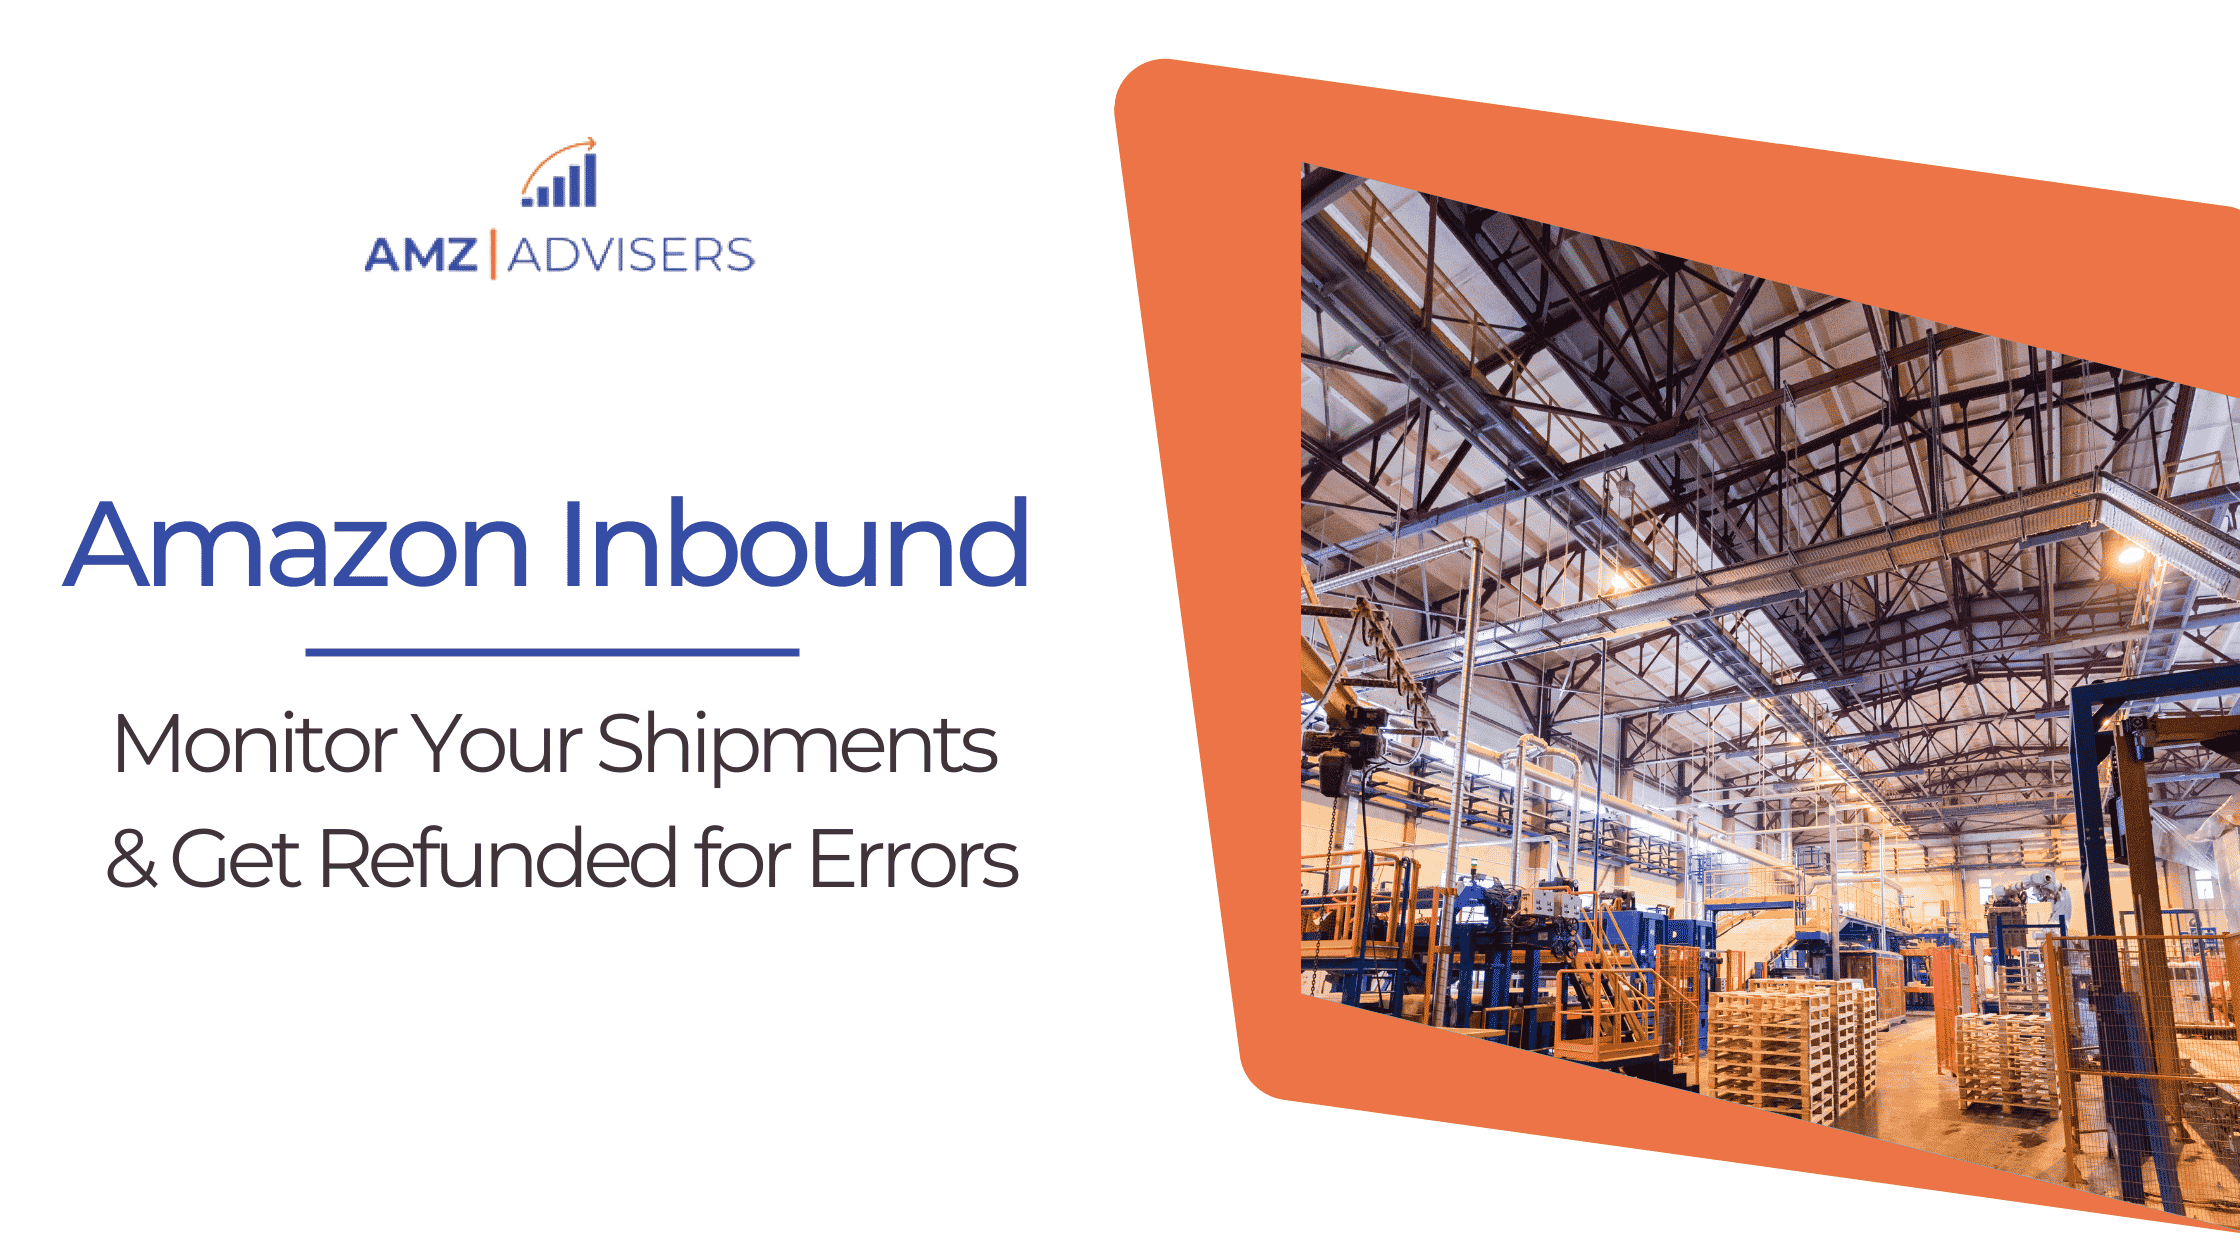 Amazon Inbound: Monitor Your Shipments & Get Refunded for Errors –